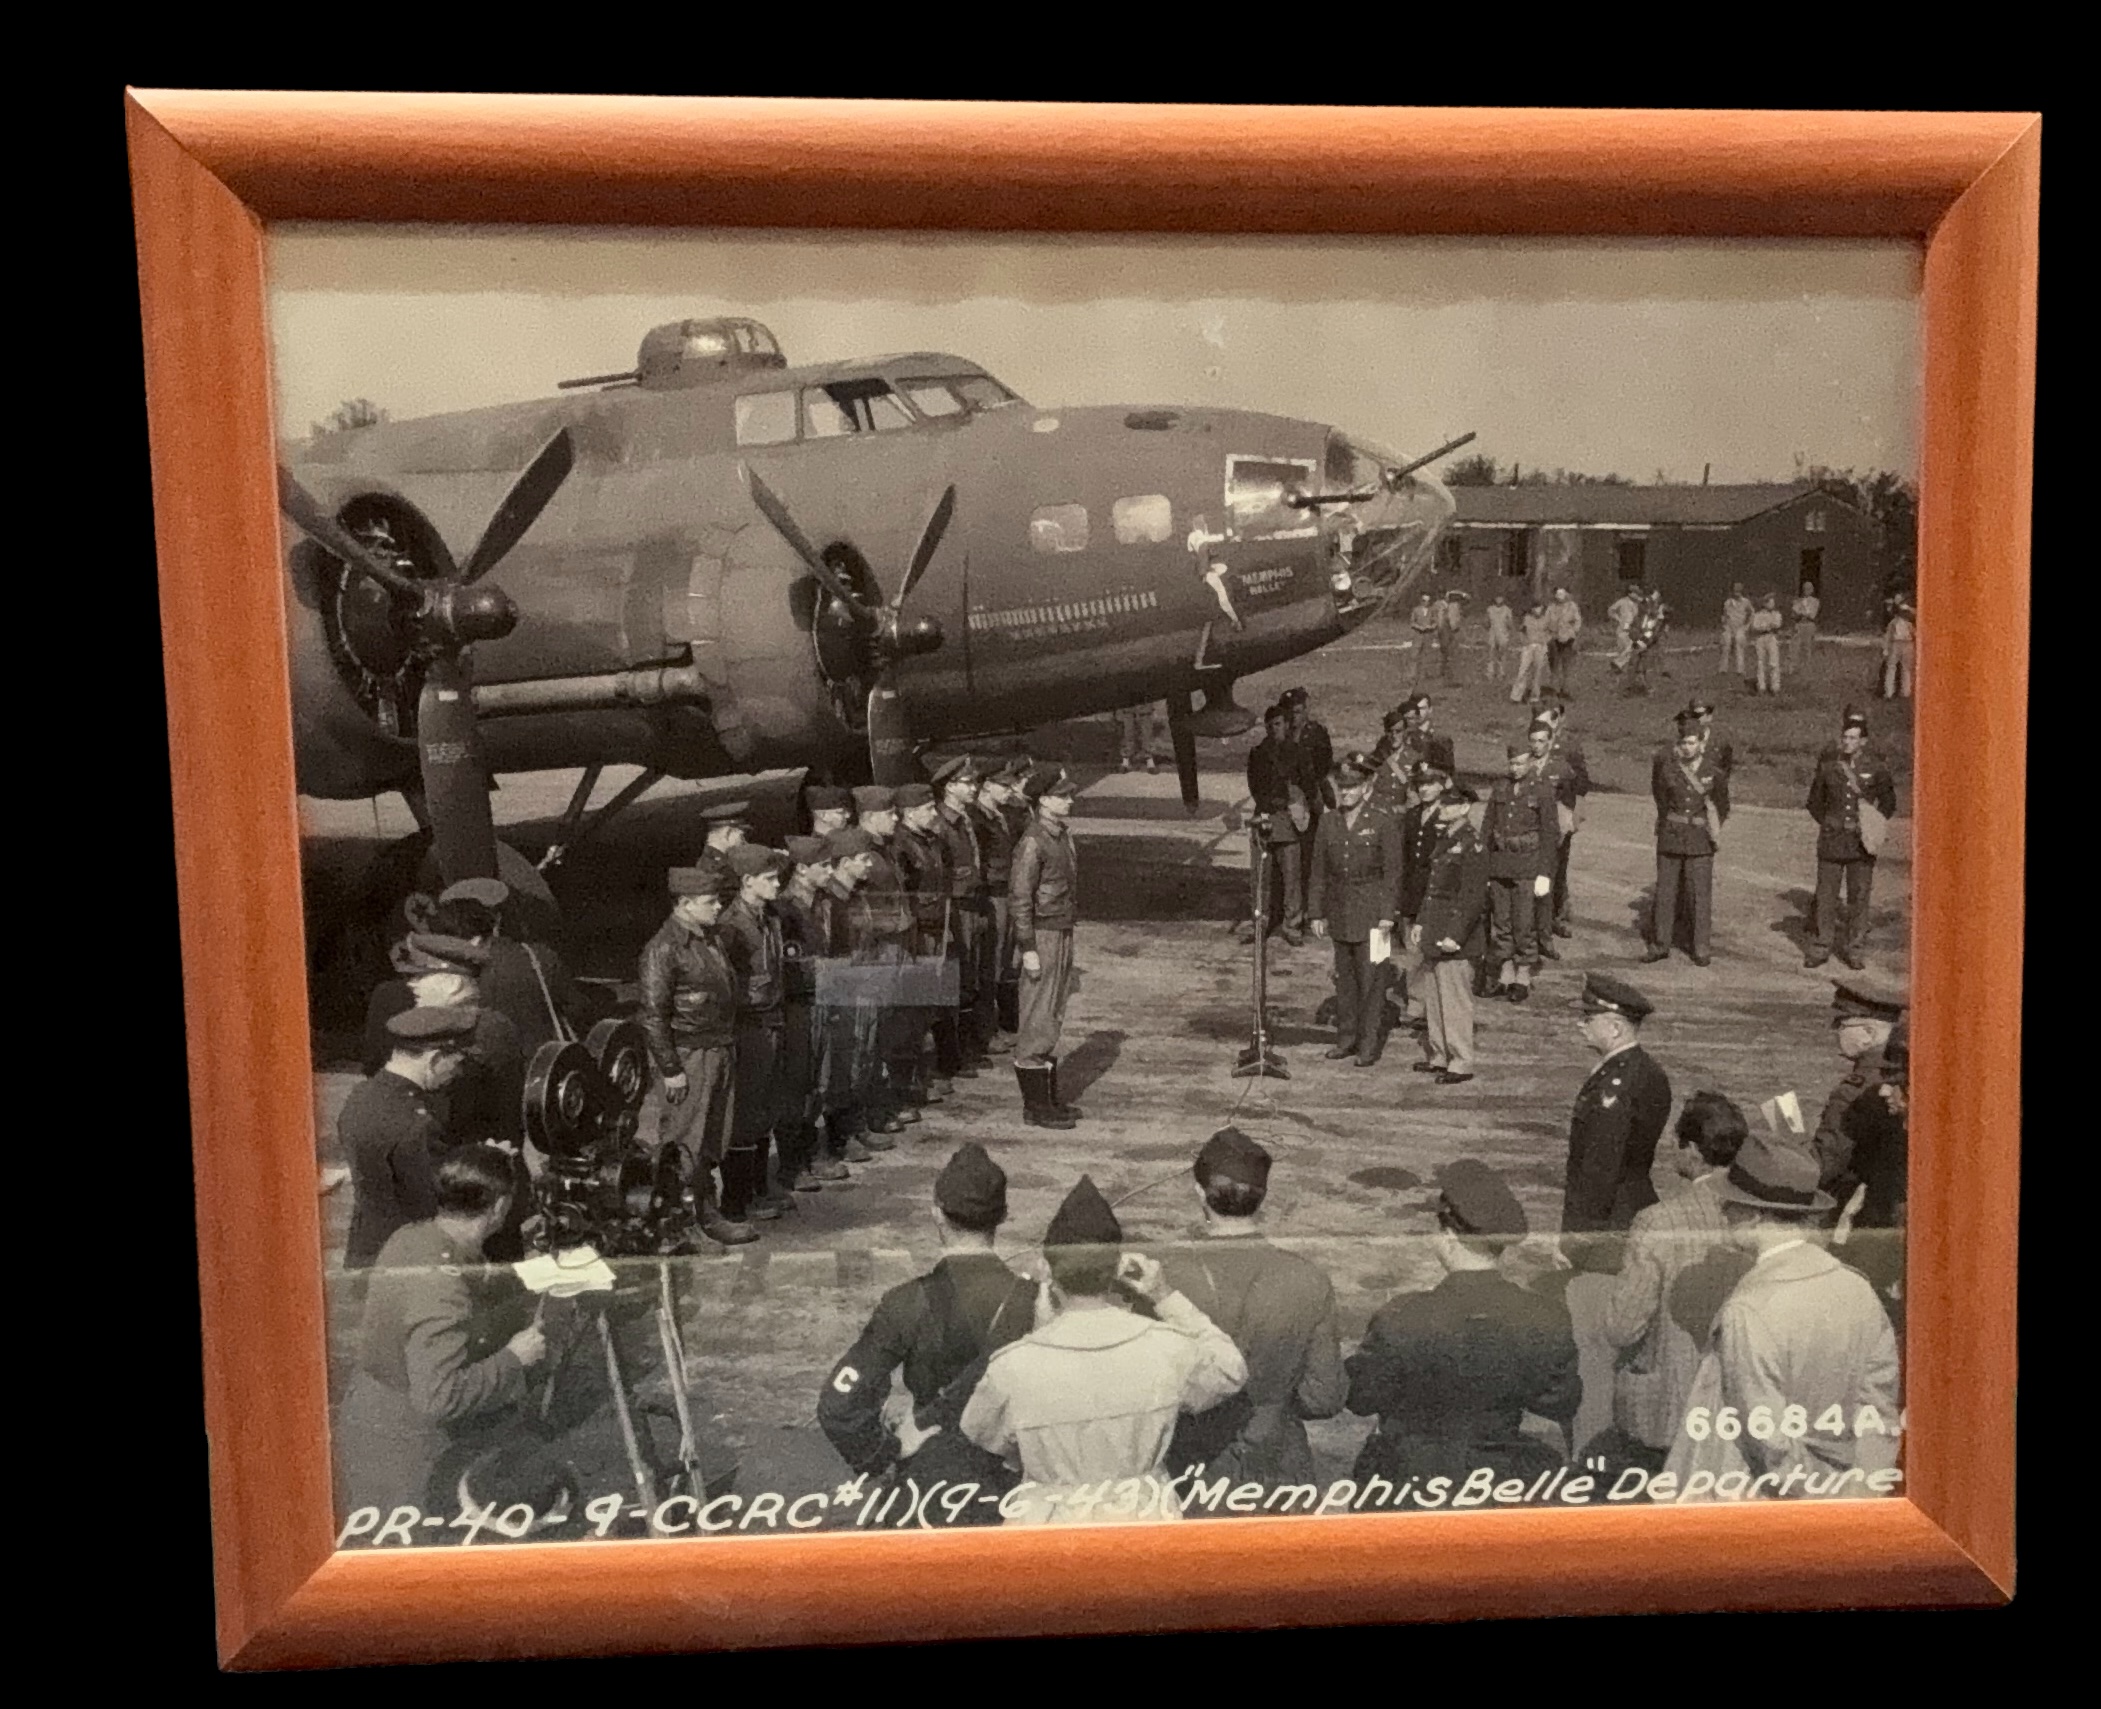 WW2 framed black and white photo of a ceremony Capt. Robert K Morgan and crew of the Boeing B-17 - Image 3 of 3